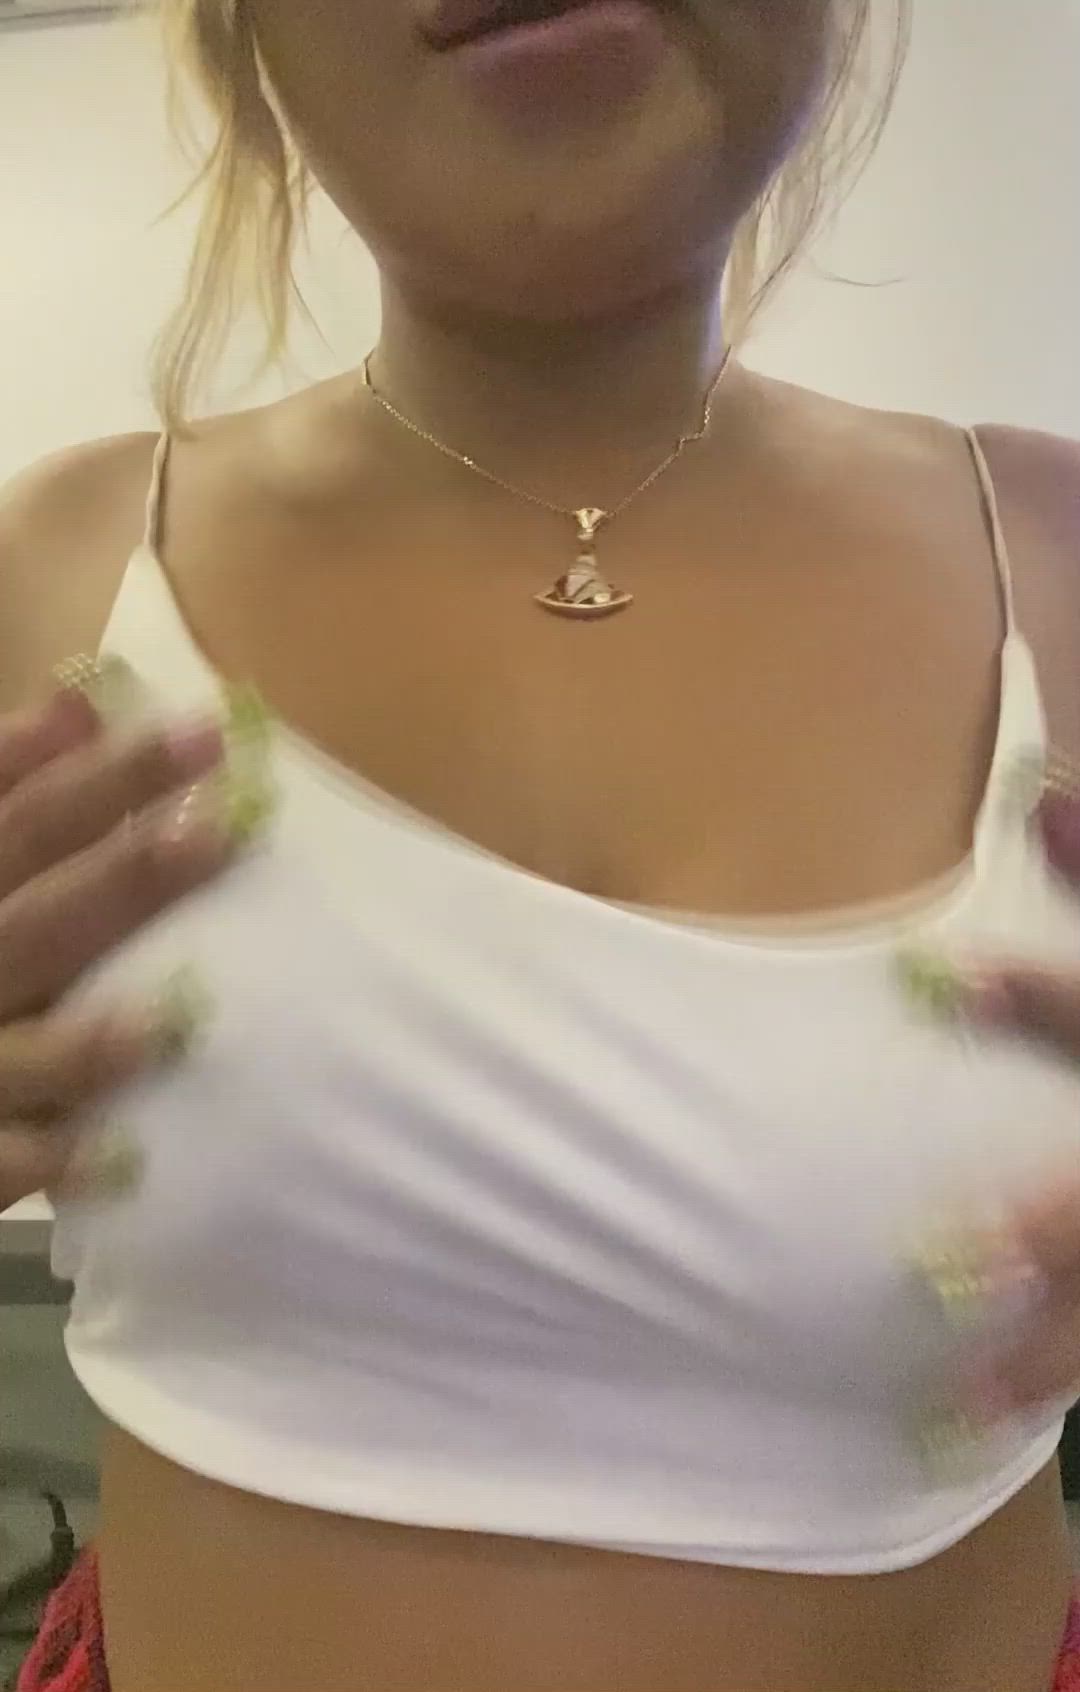 Big Tits porn video with onlyfans model claraexo <strong>@itsclaraexotic</strong>